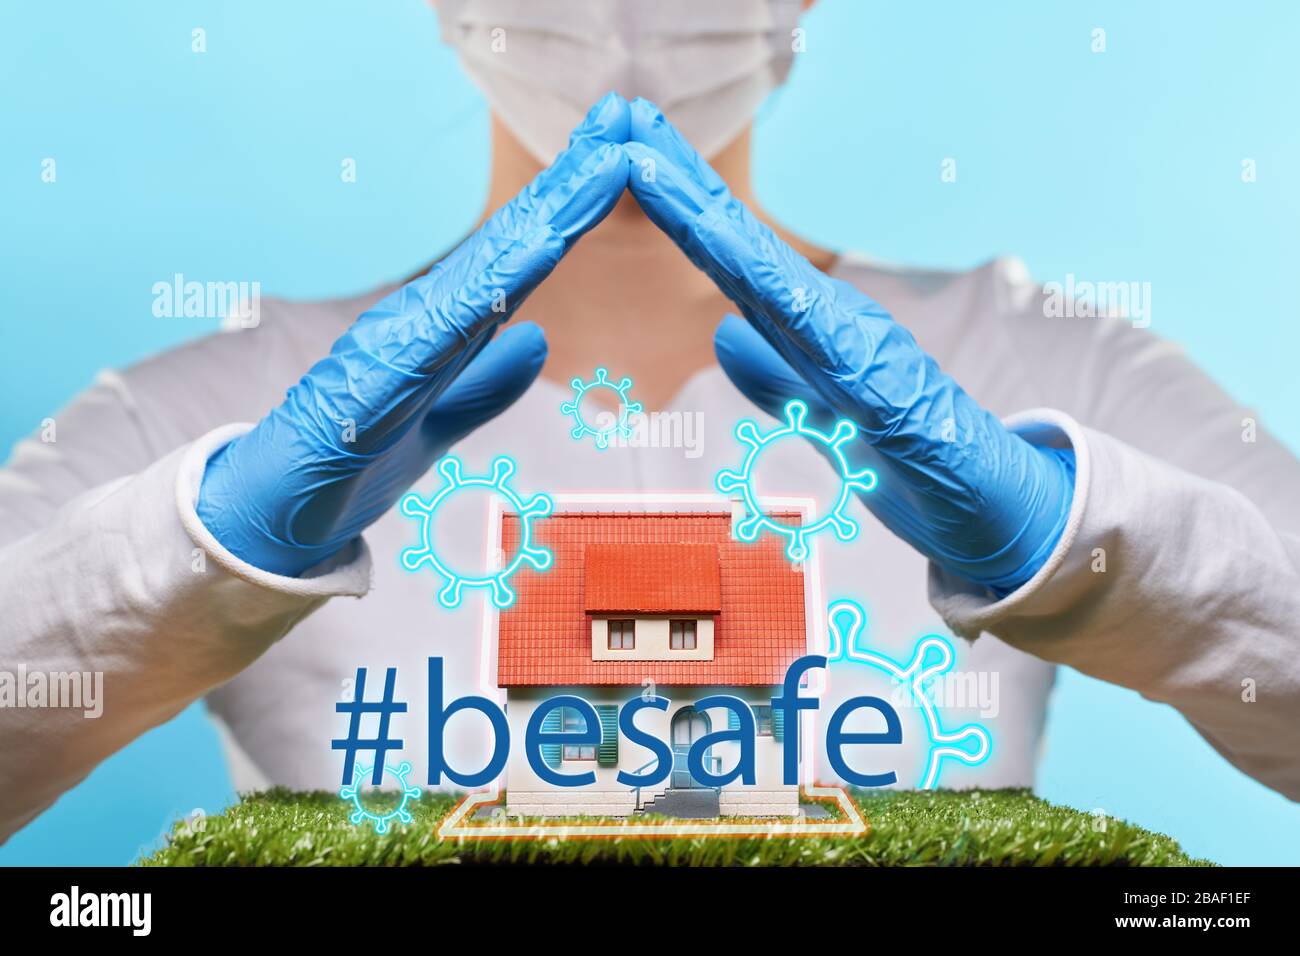 Woman in medical gloves and mask holds hands over a house. Concept of home stay, quarantine, security inside the house. Covid-19 Corona Prevention Mea Stock Photo